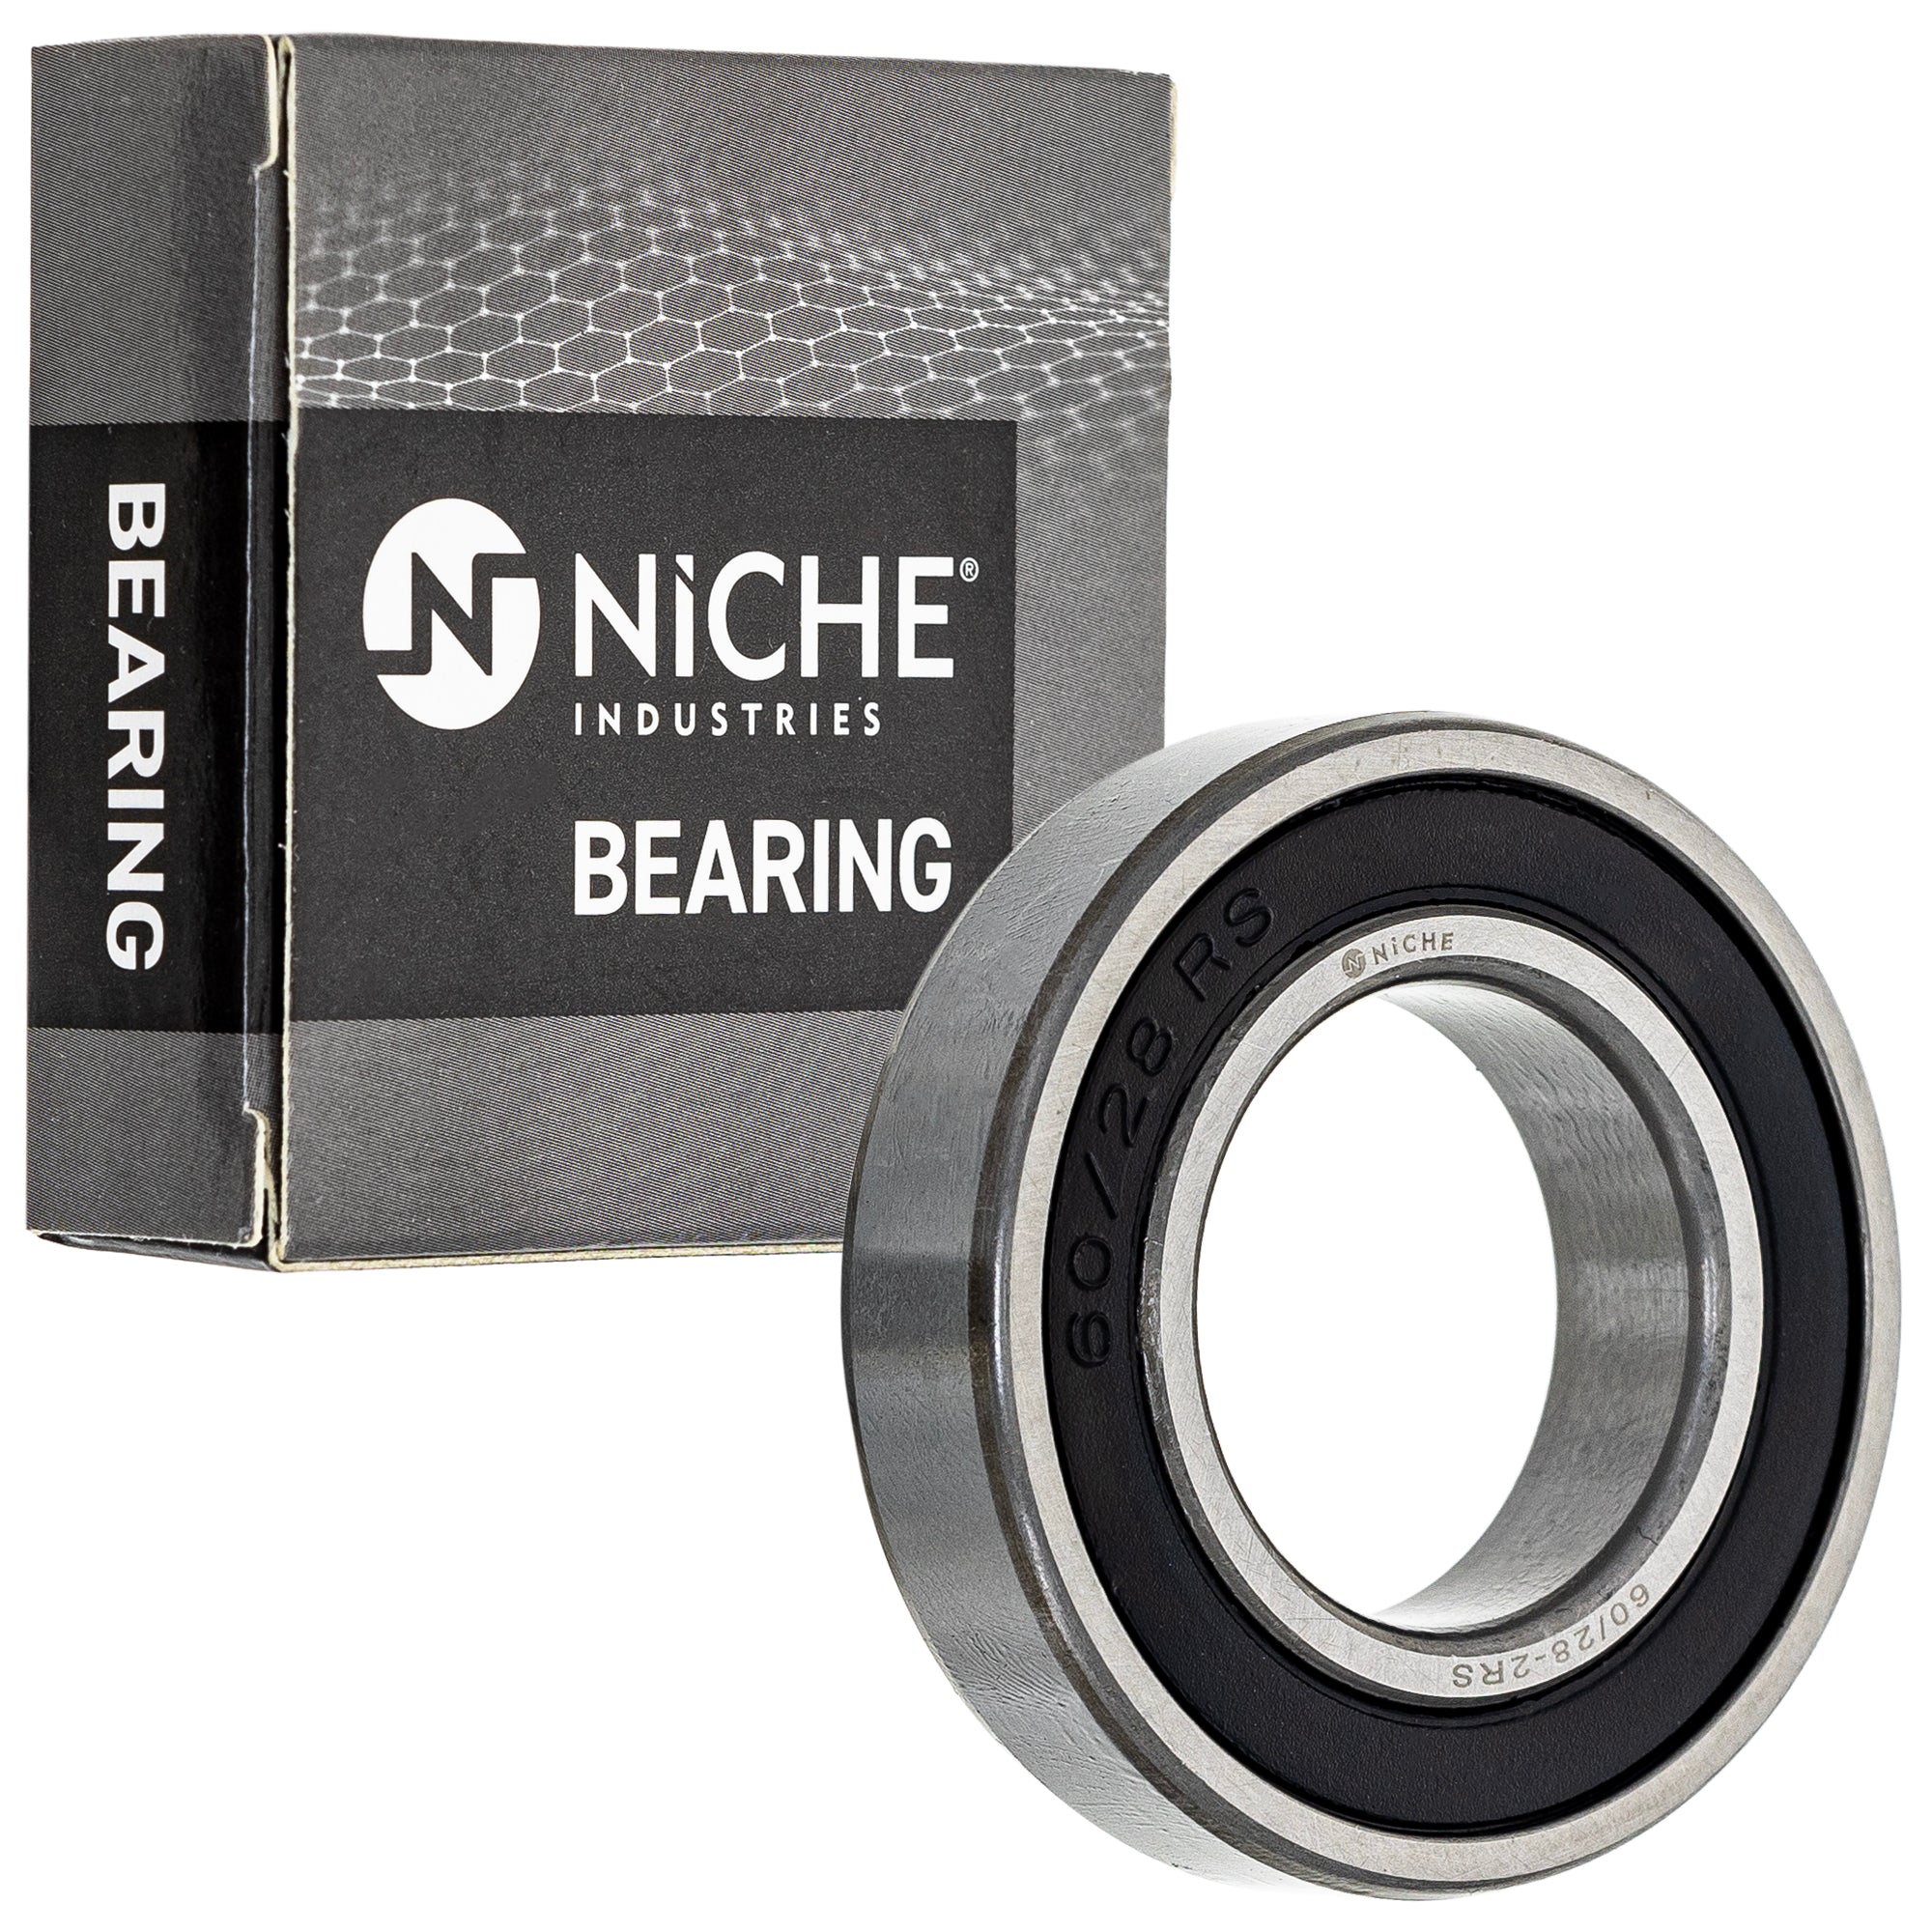 NICHE 519-CBB2264R Bearing & Seal Kit 2-Pack for zOTHER Stateline